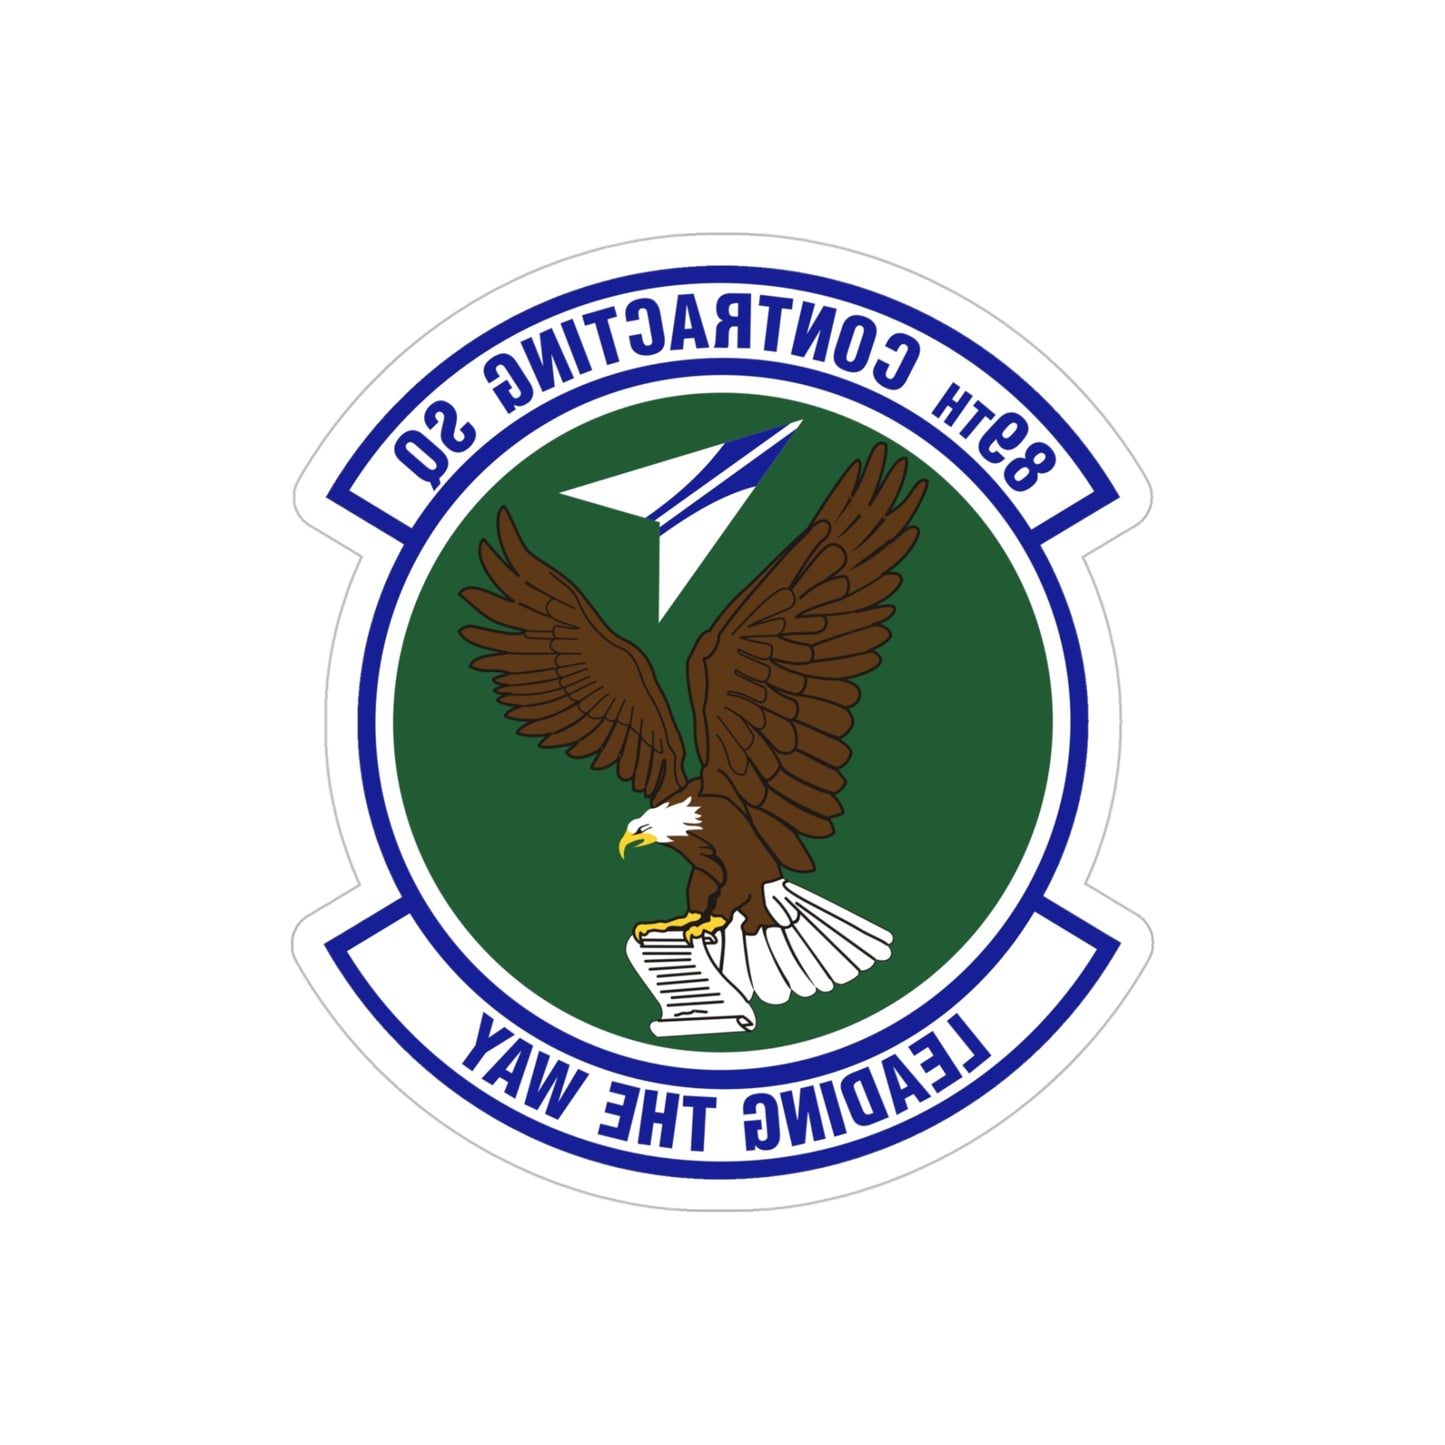 89th Contracting Squadron (U.S. Air Force) REVERSE PRINT Transparent STICKER